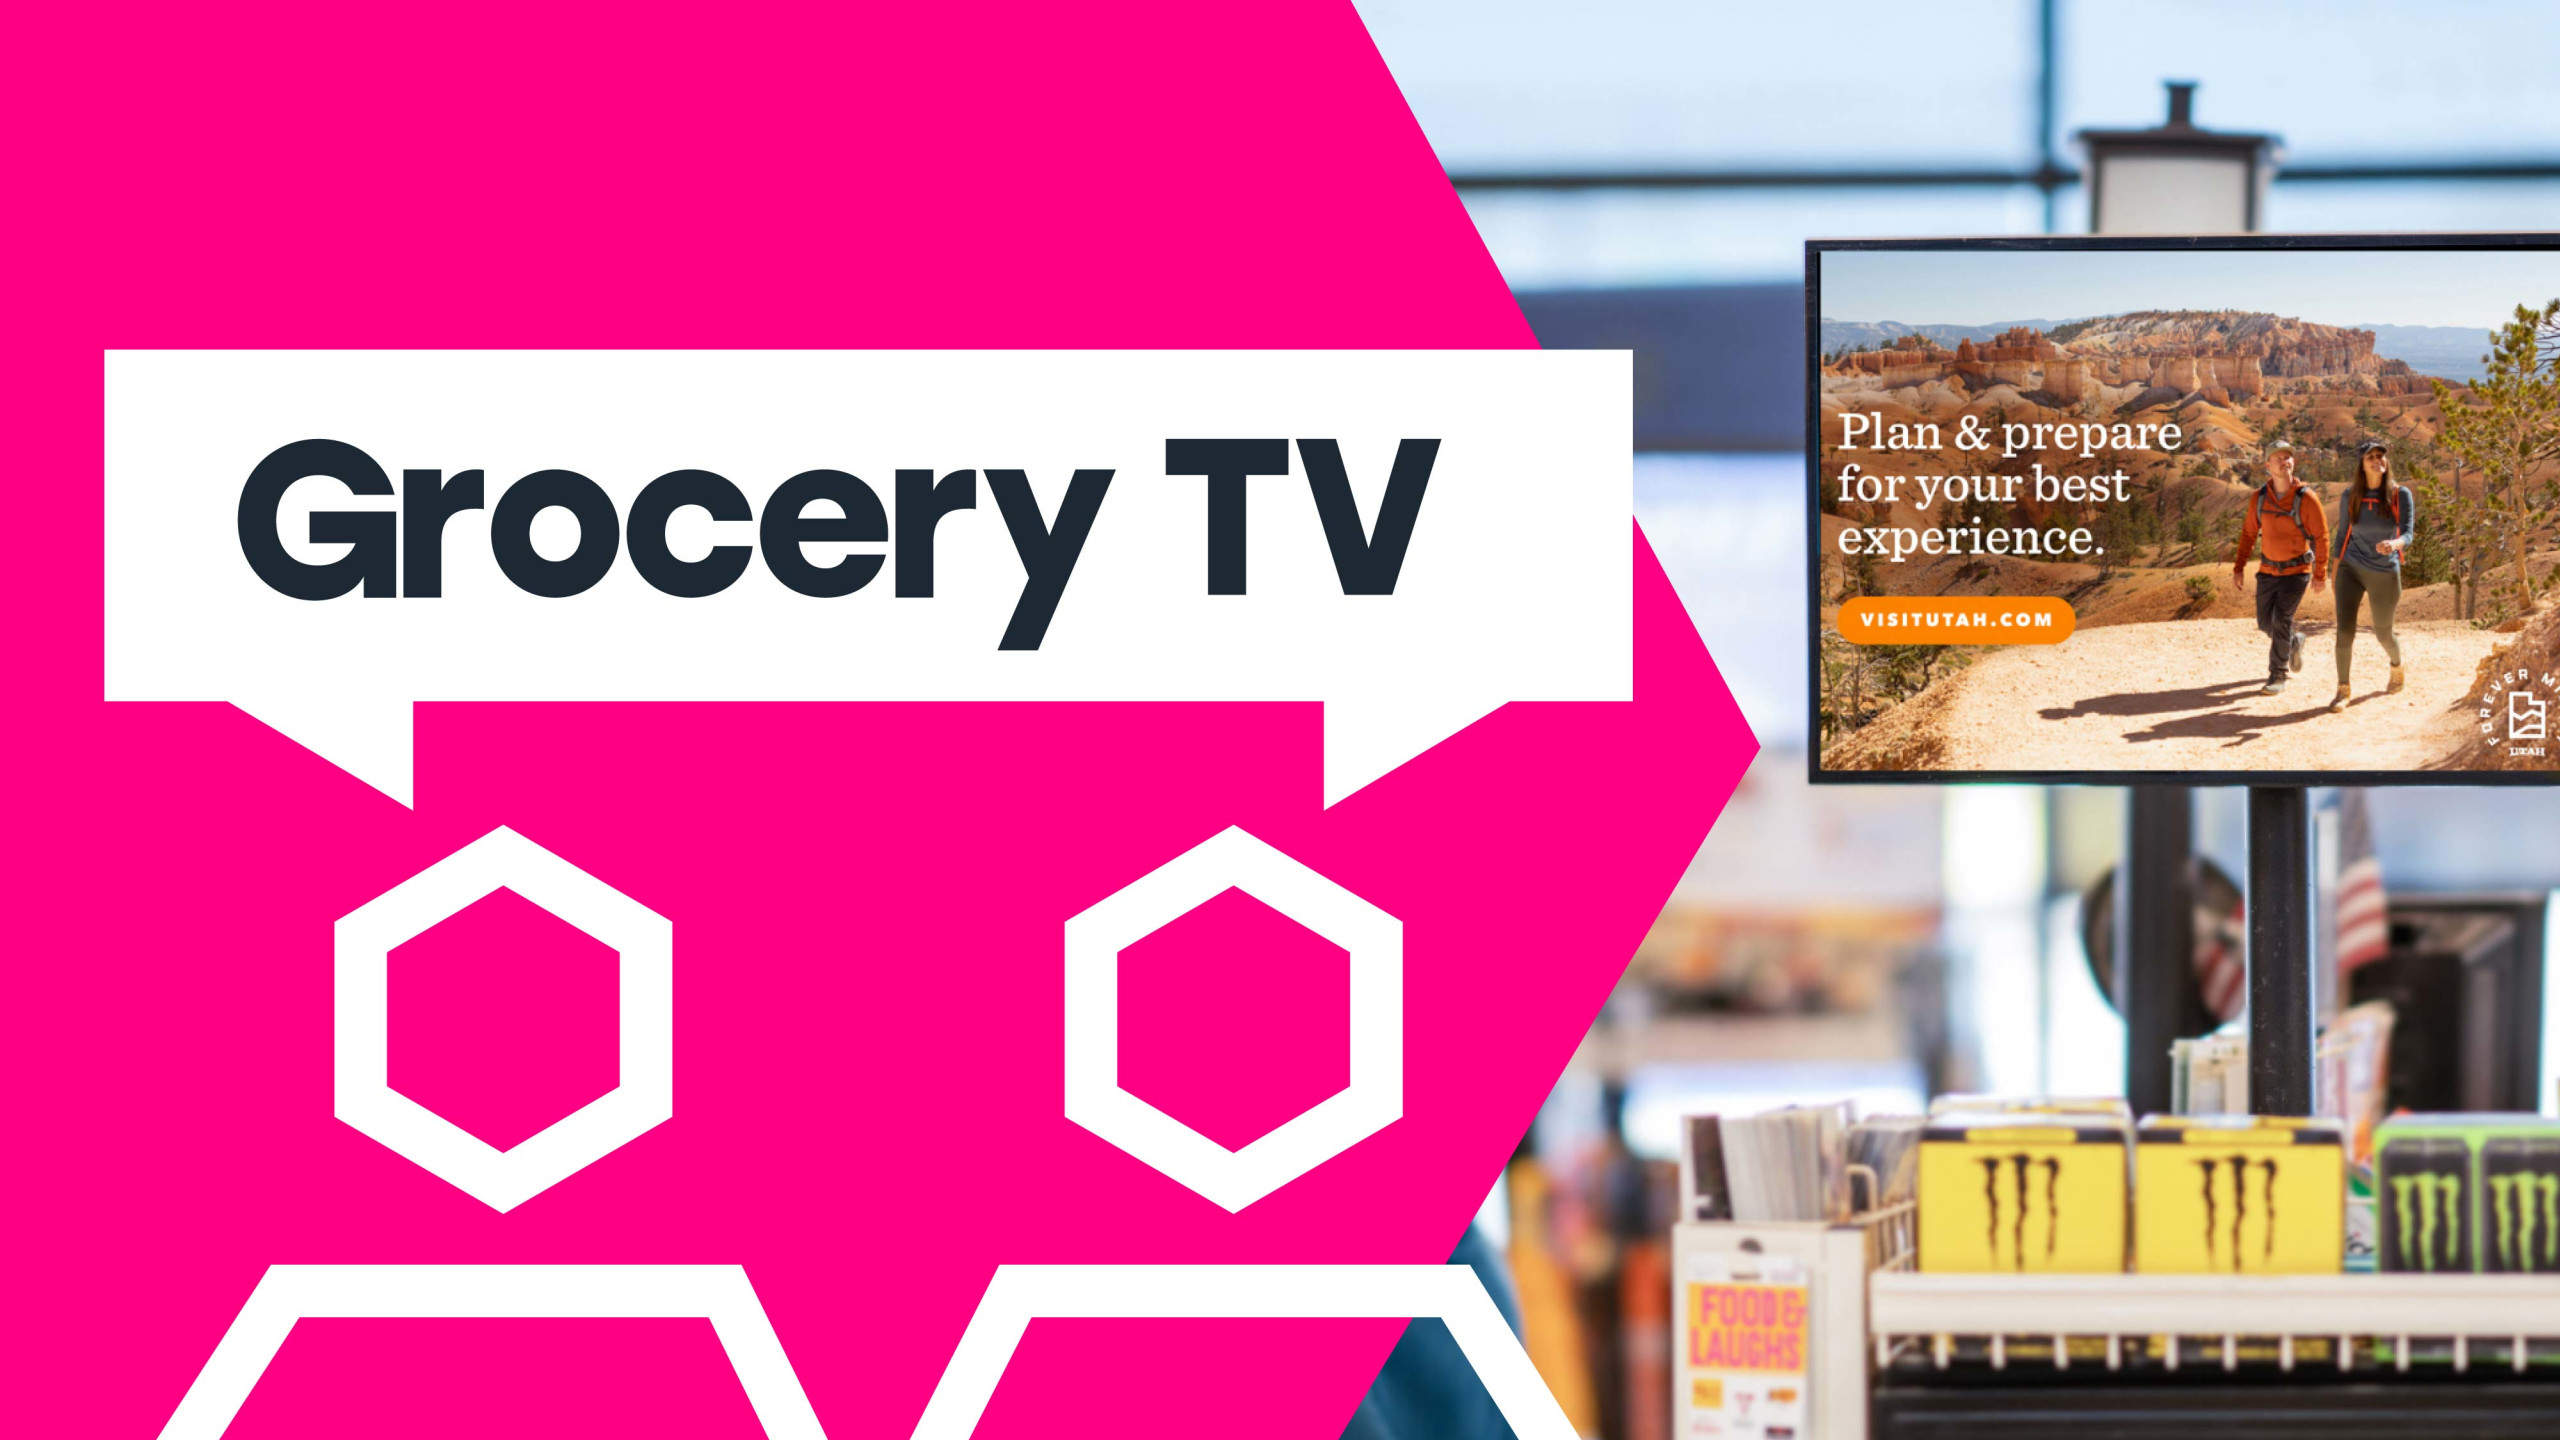 Hivestack sat down with Ashley Nickell, Senior Director of Marketing at Grocery TV to discuss why integrating programmatic DOOH was a winning business strategy, how it has created new opportunities and unique nuances or learnings around digital in-store advertising.